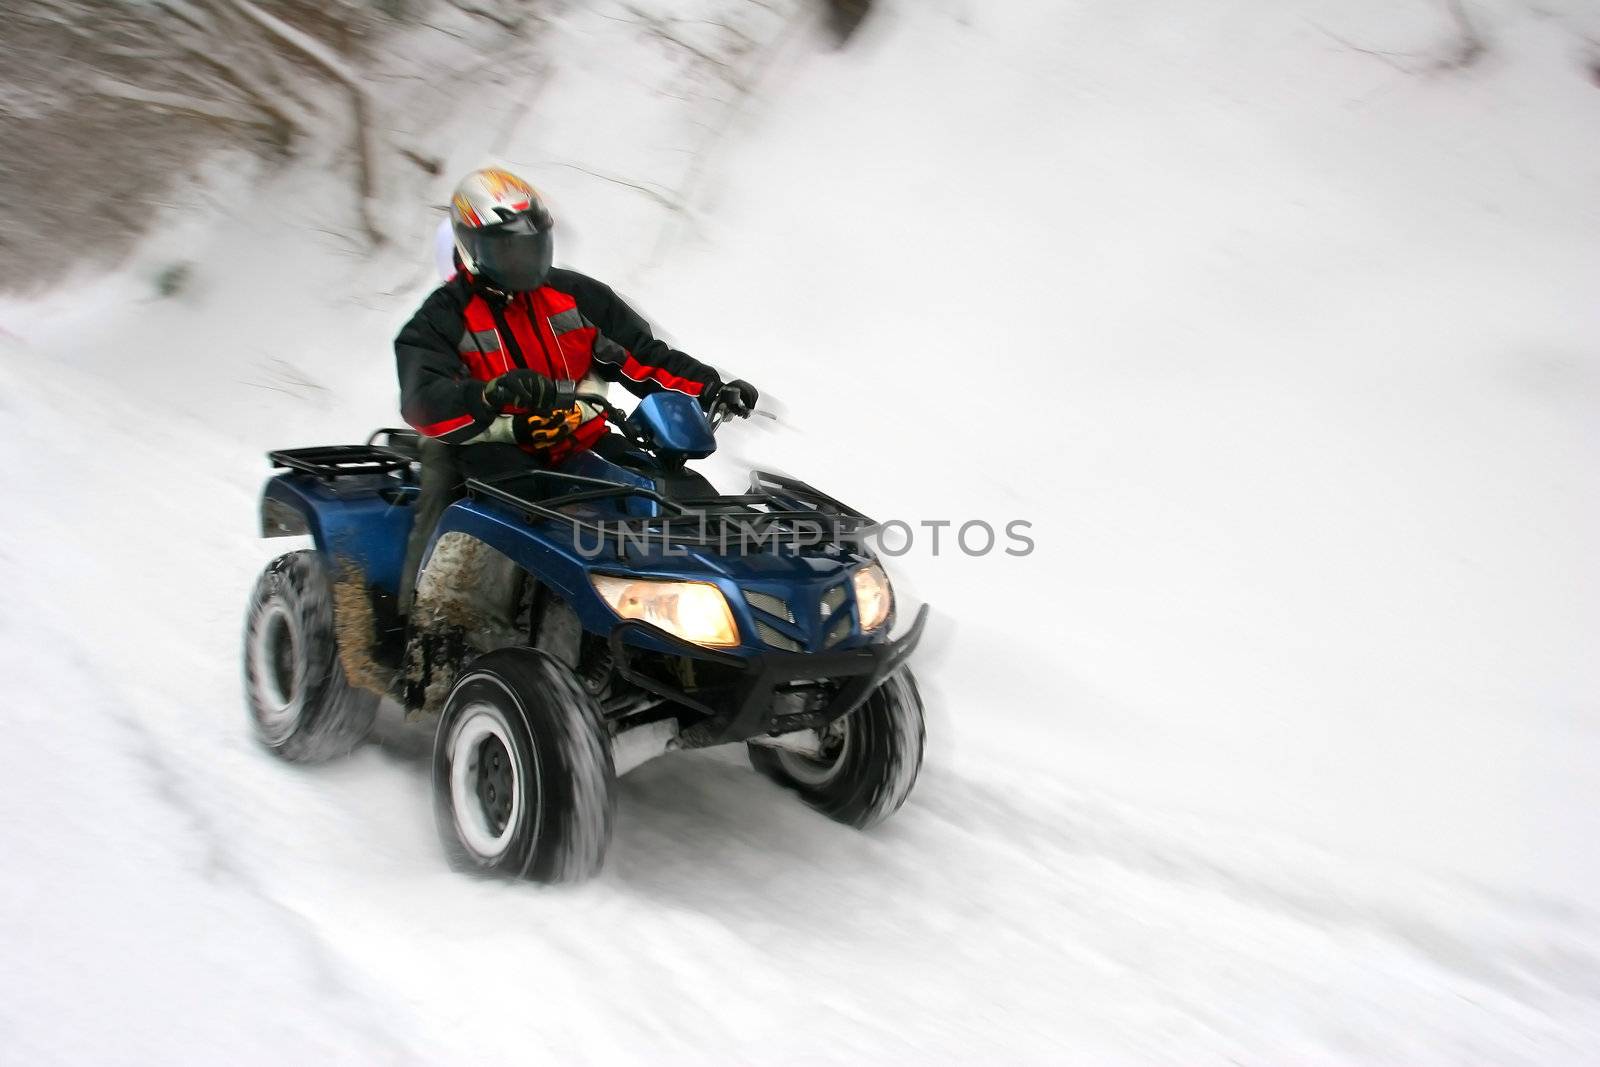 Riding with an All Terrain Vehicle on snow